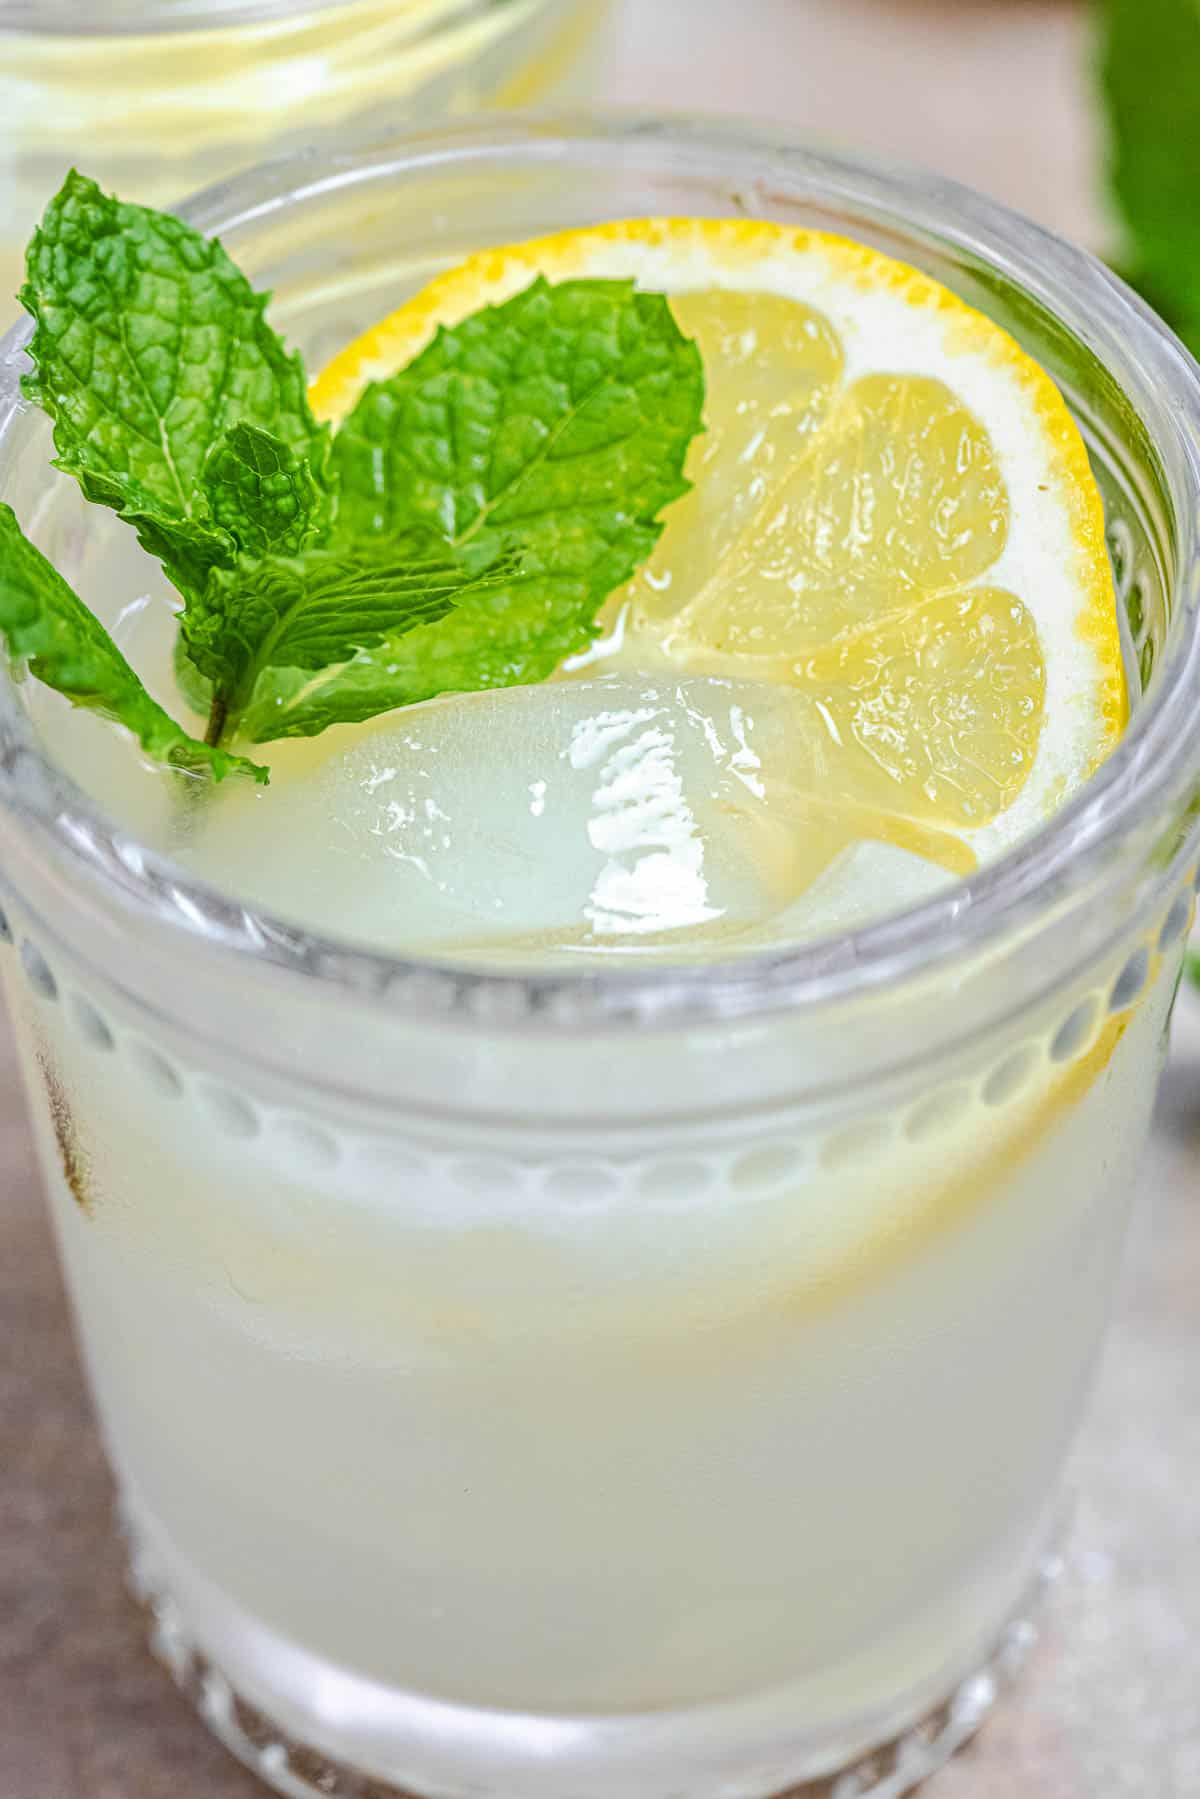 Easy Ouzo Drink with Lemon | The Mediterranean Dish